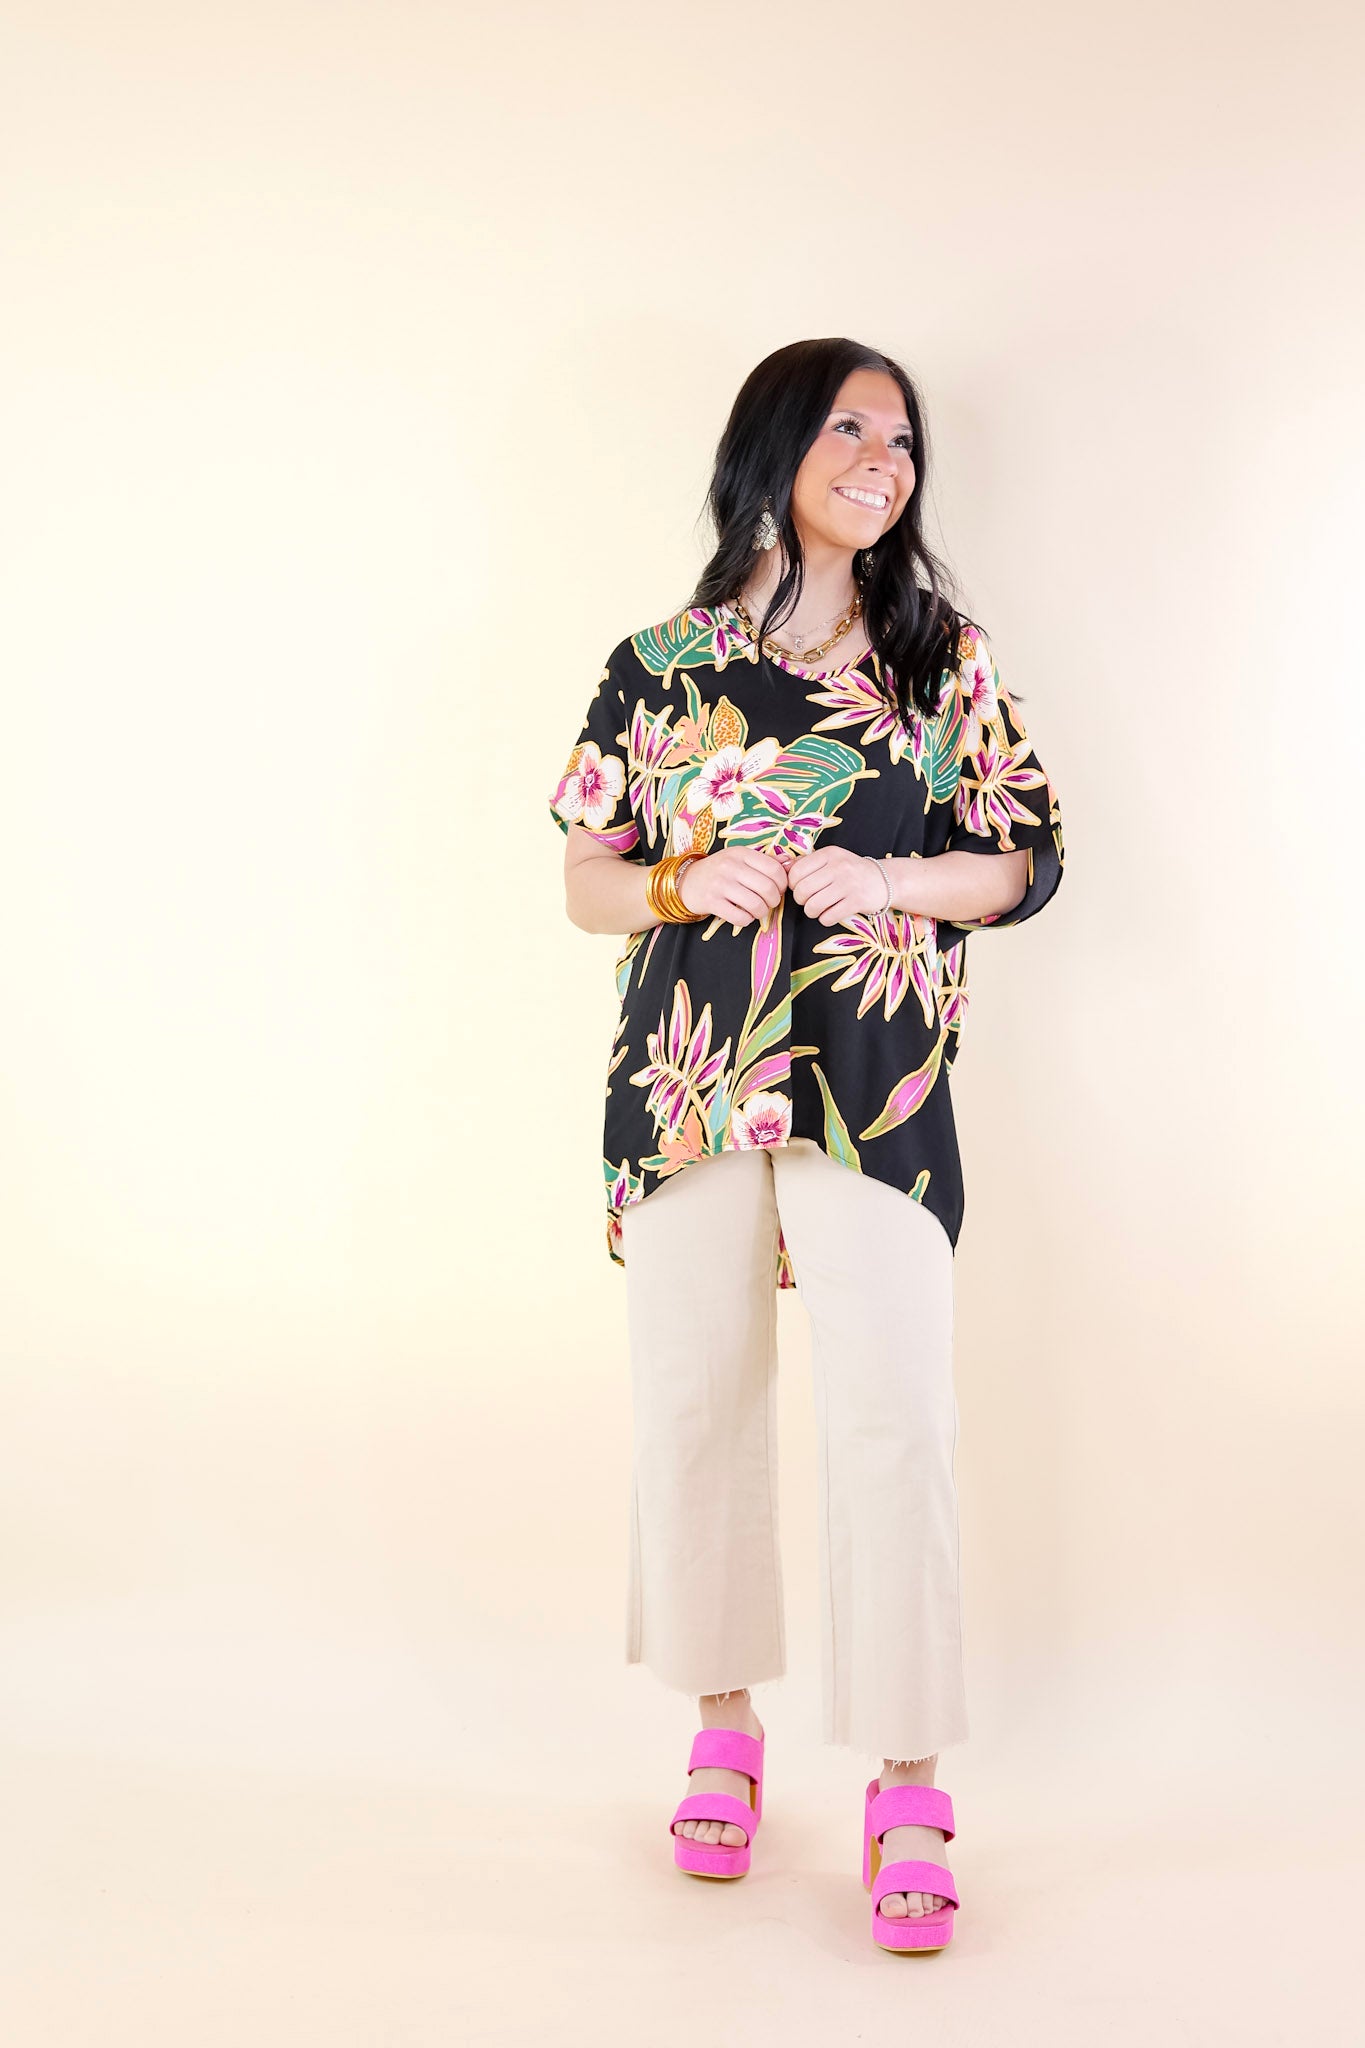 Island Oasis Tropical Floral Print Top in Black - Giddy Up Glamour Boutique